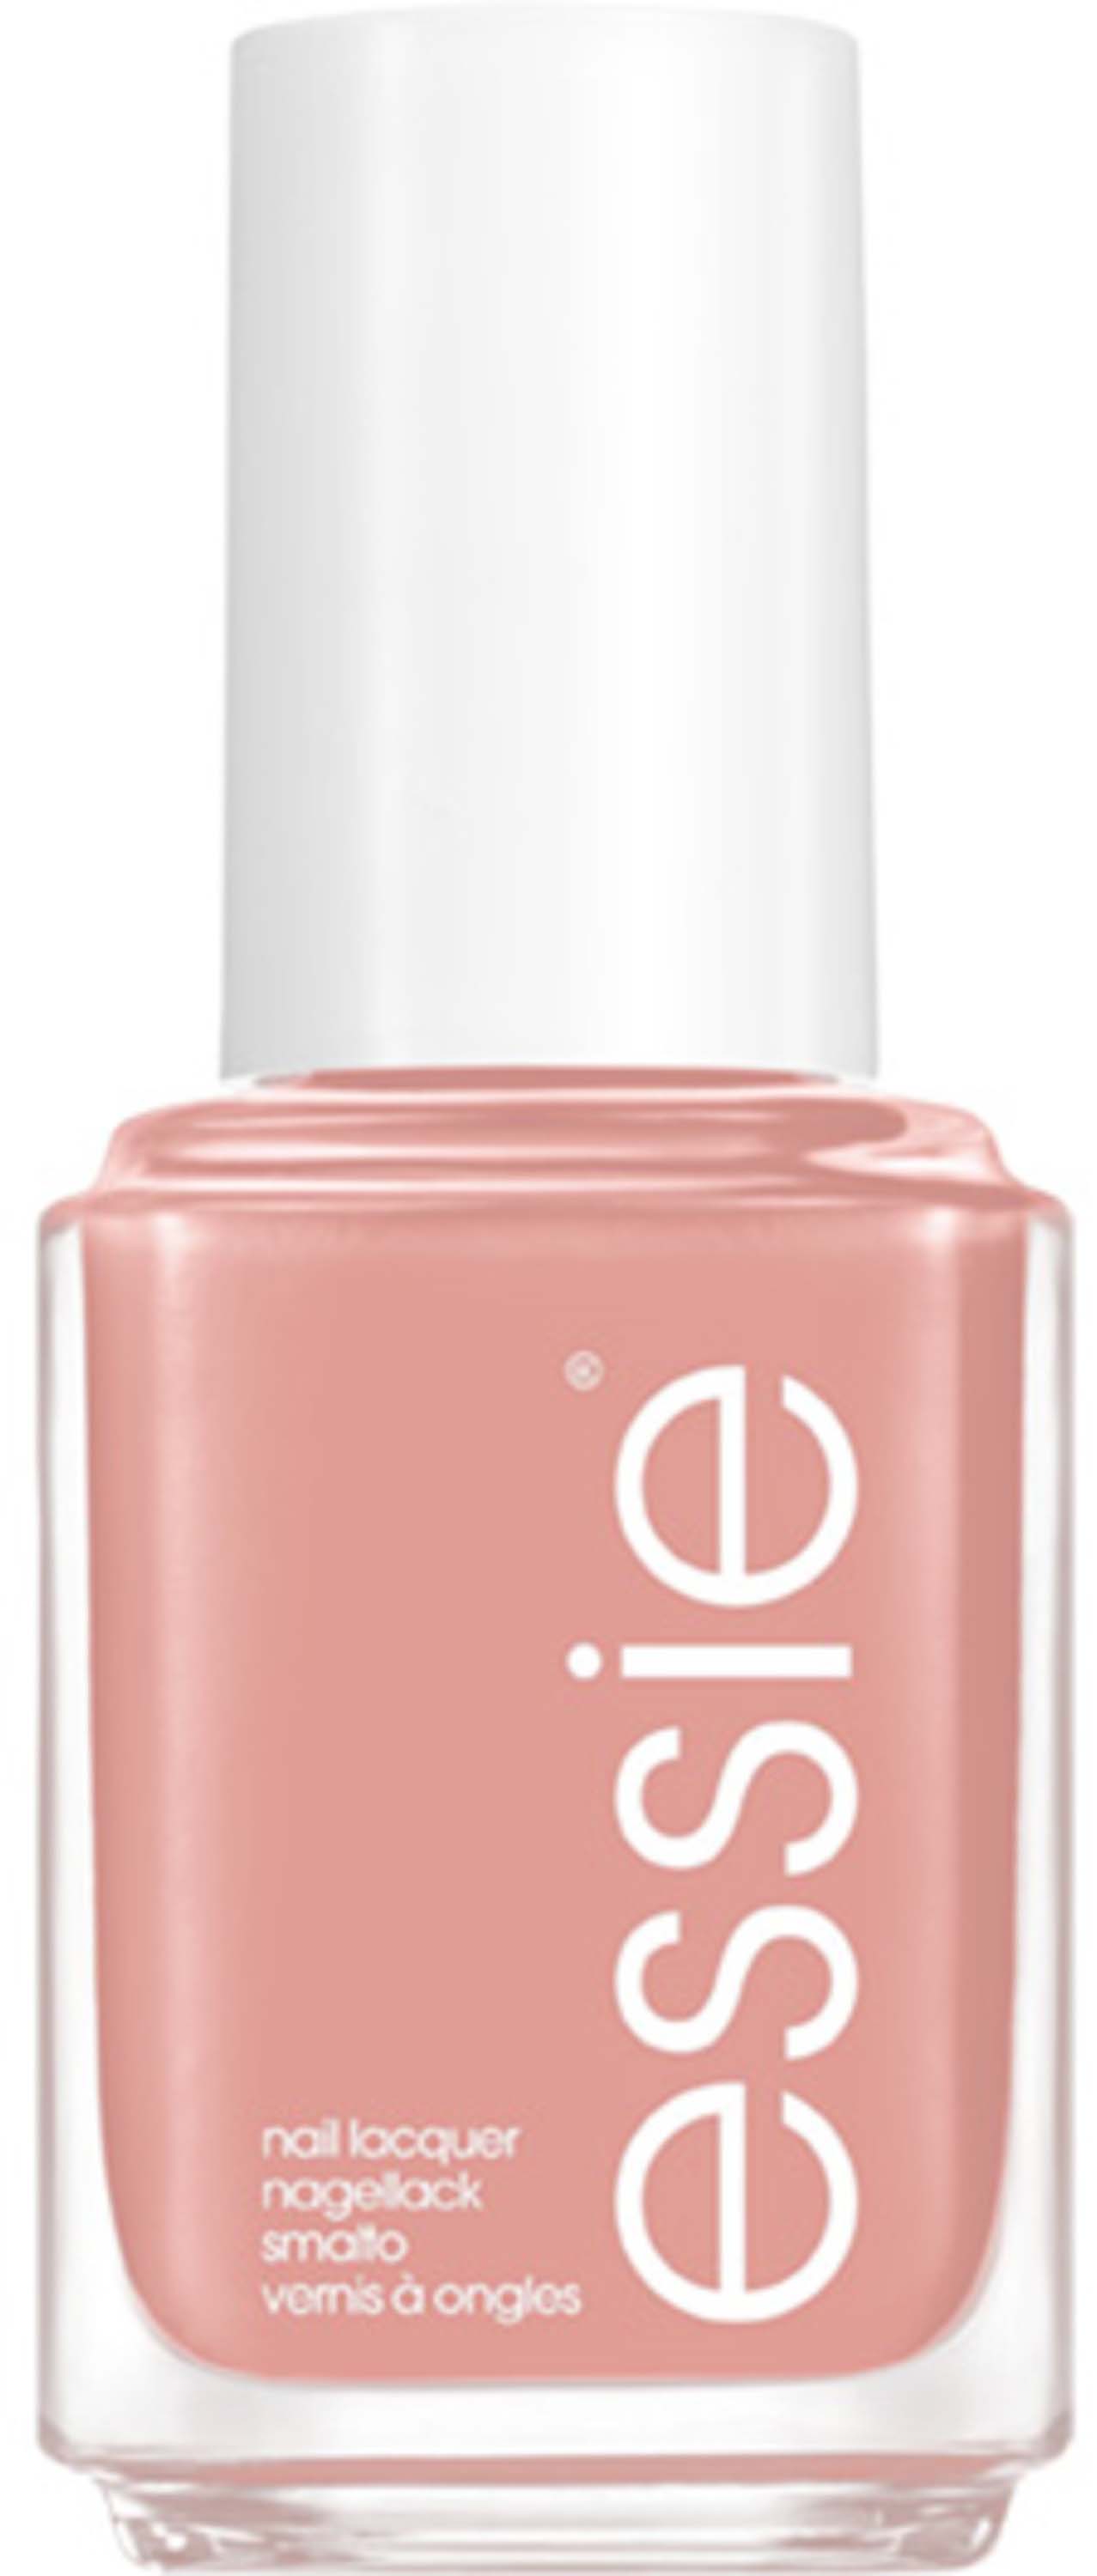 Real collection Essie Lacquer Is The Nail red-y 749 Snuggle not for bed